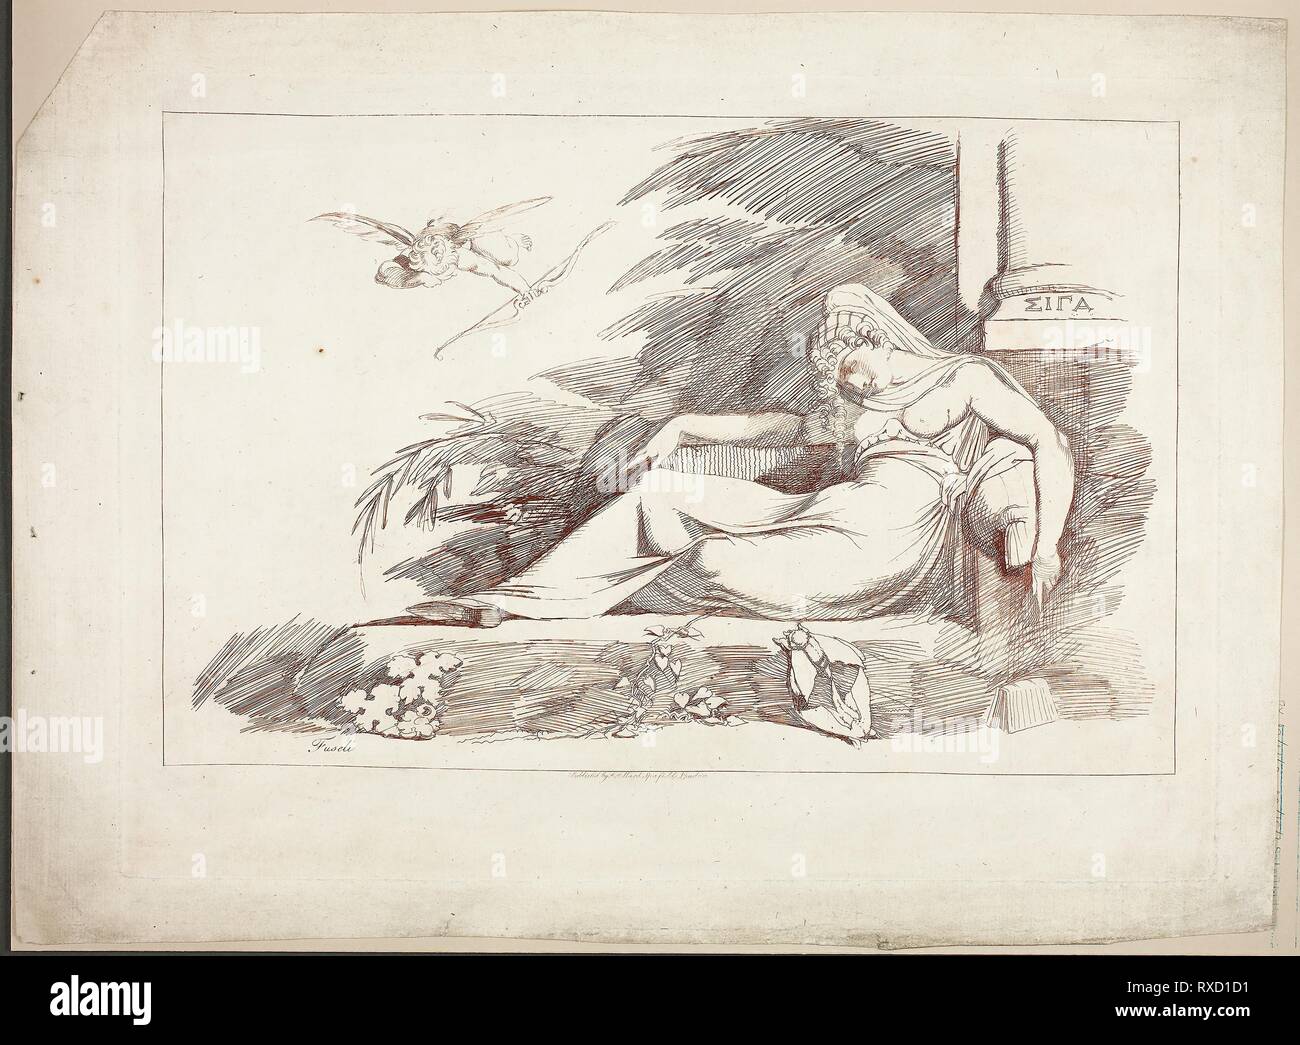 Sleeping Woman with a Cupid. Henry Fuseli (Swiss, active in England, 1741-1825); published by Robert Pollard (British, c. 1755-1838). Date: 1780-1790. Dimensions: 225 × 345 mm (image); 278 × 380 mm (plate); 322 × 433 mm (sheet). Etching in red-brown on ivory laid paper. Origin: England. Museum: The Chicago Art Institute. Stock Photo